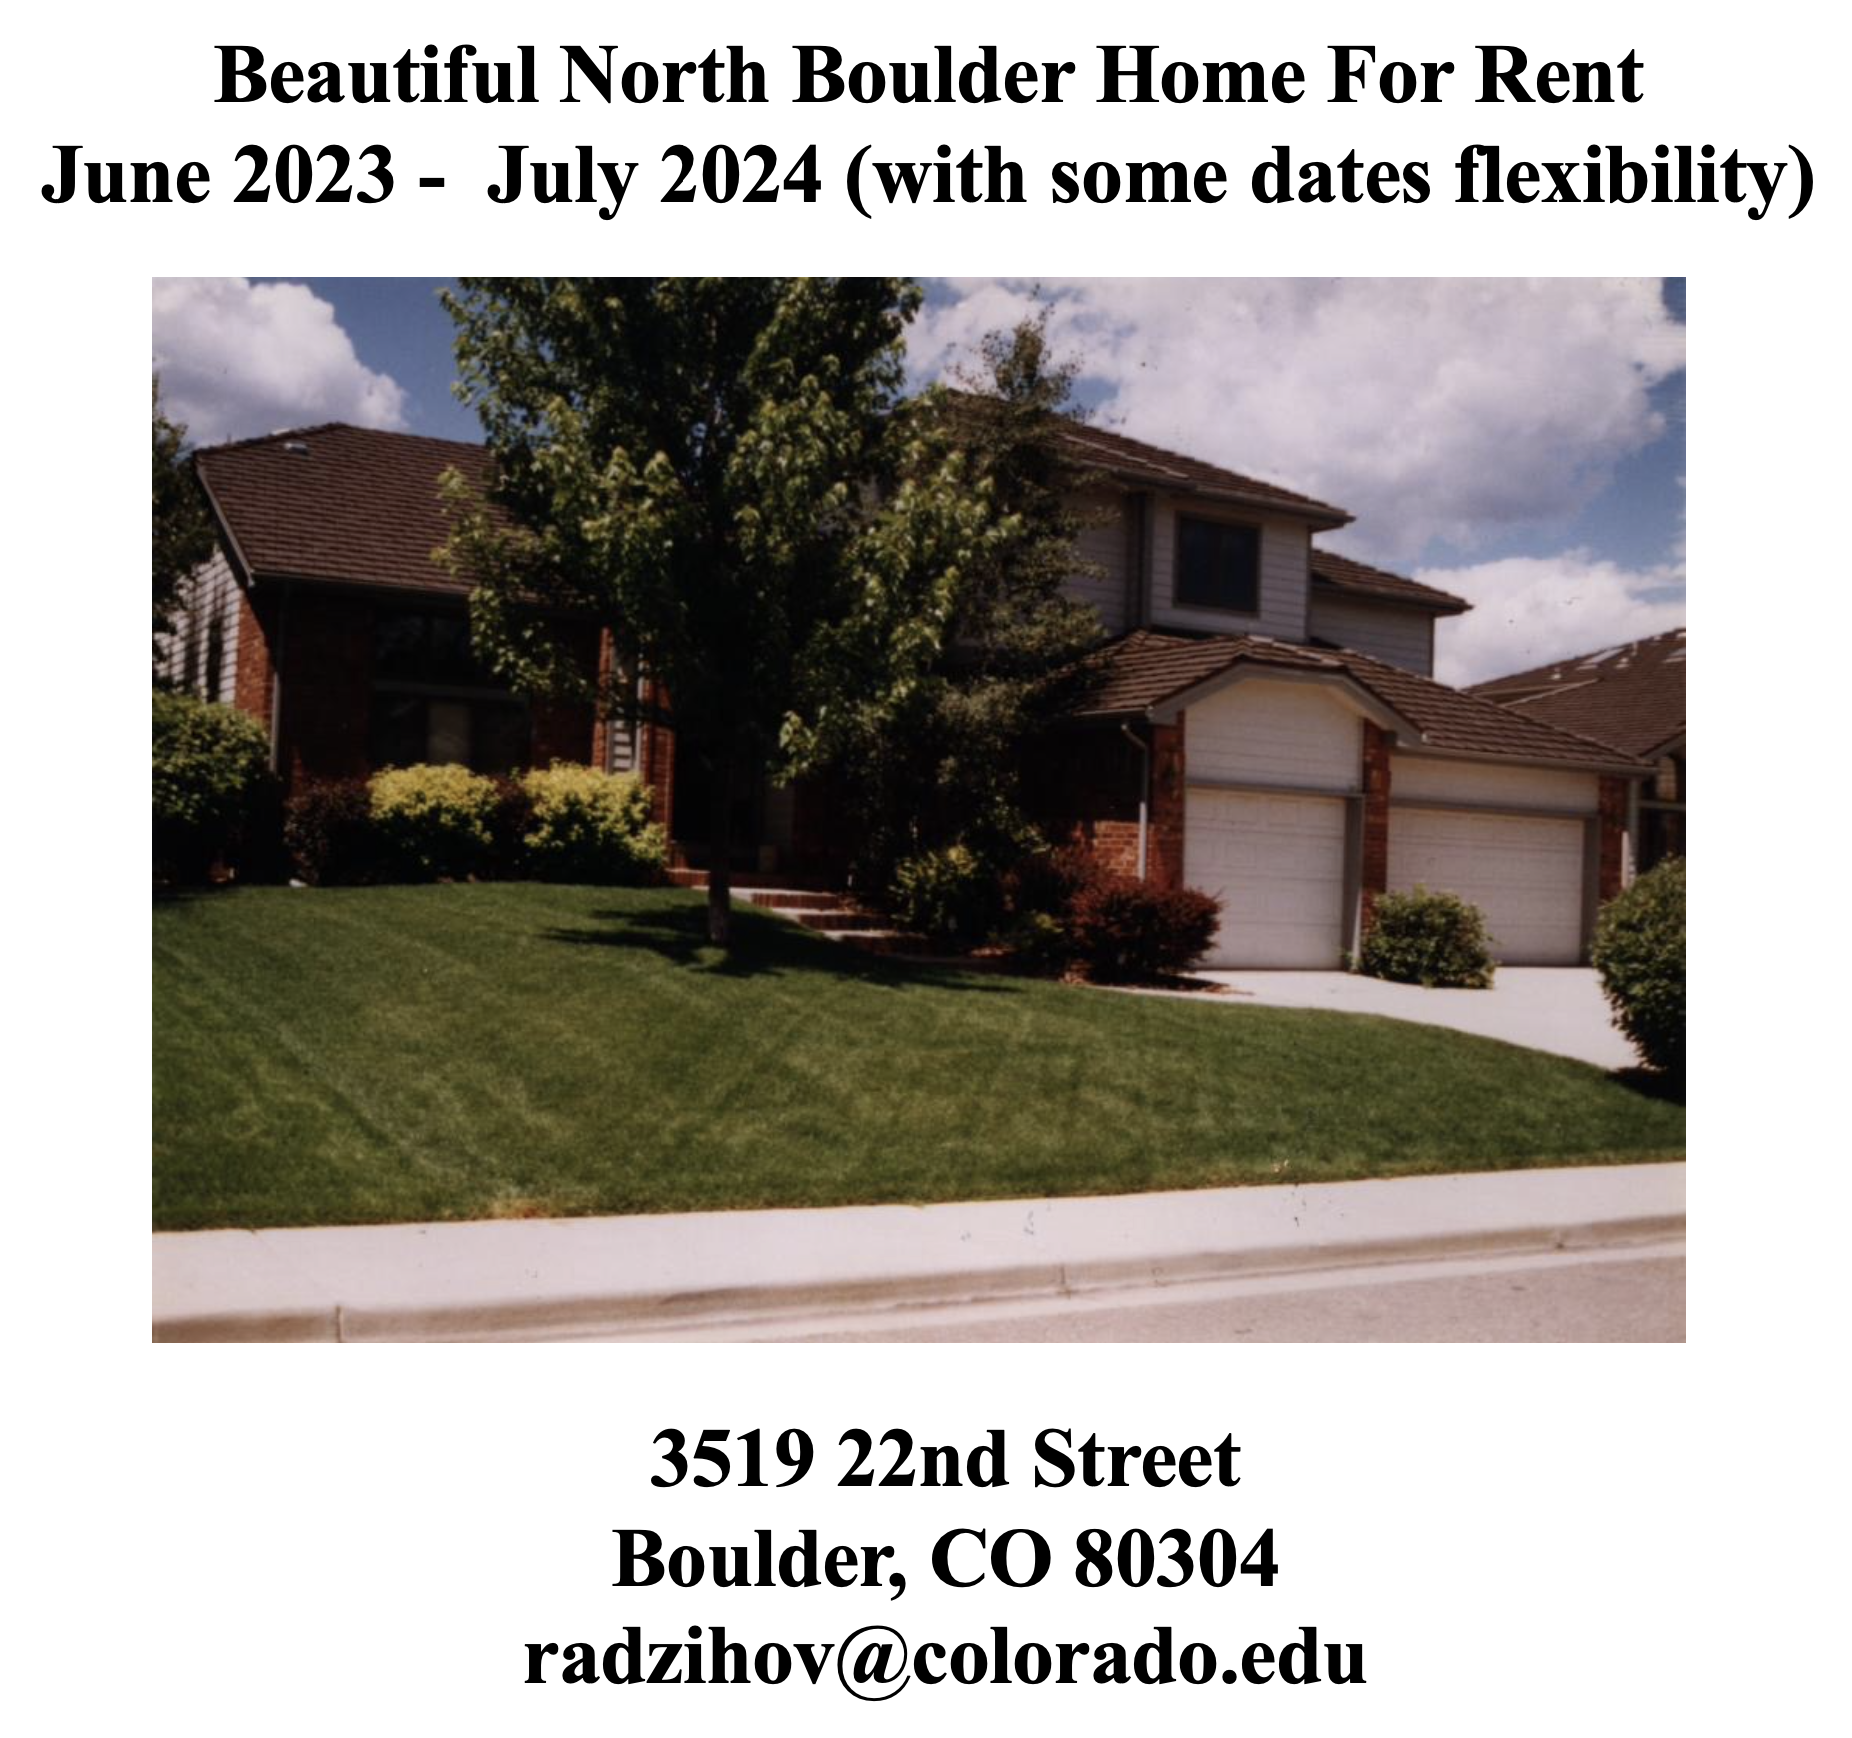 Beautiful North Boulder Home For Rent at 3519 22nd St. in Boulder